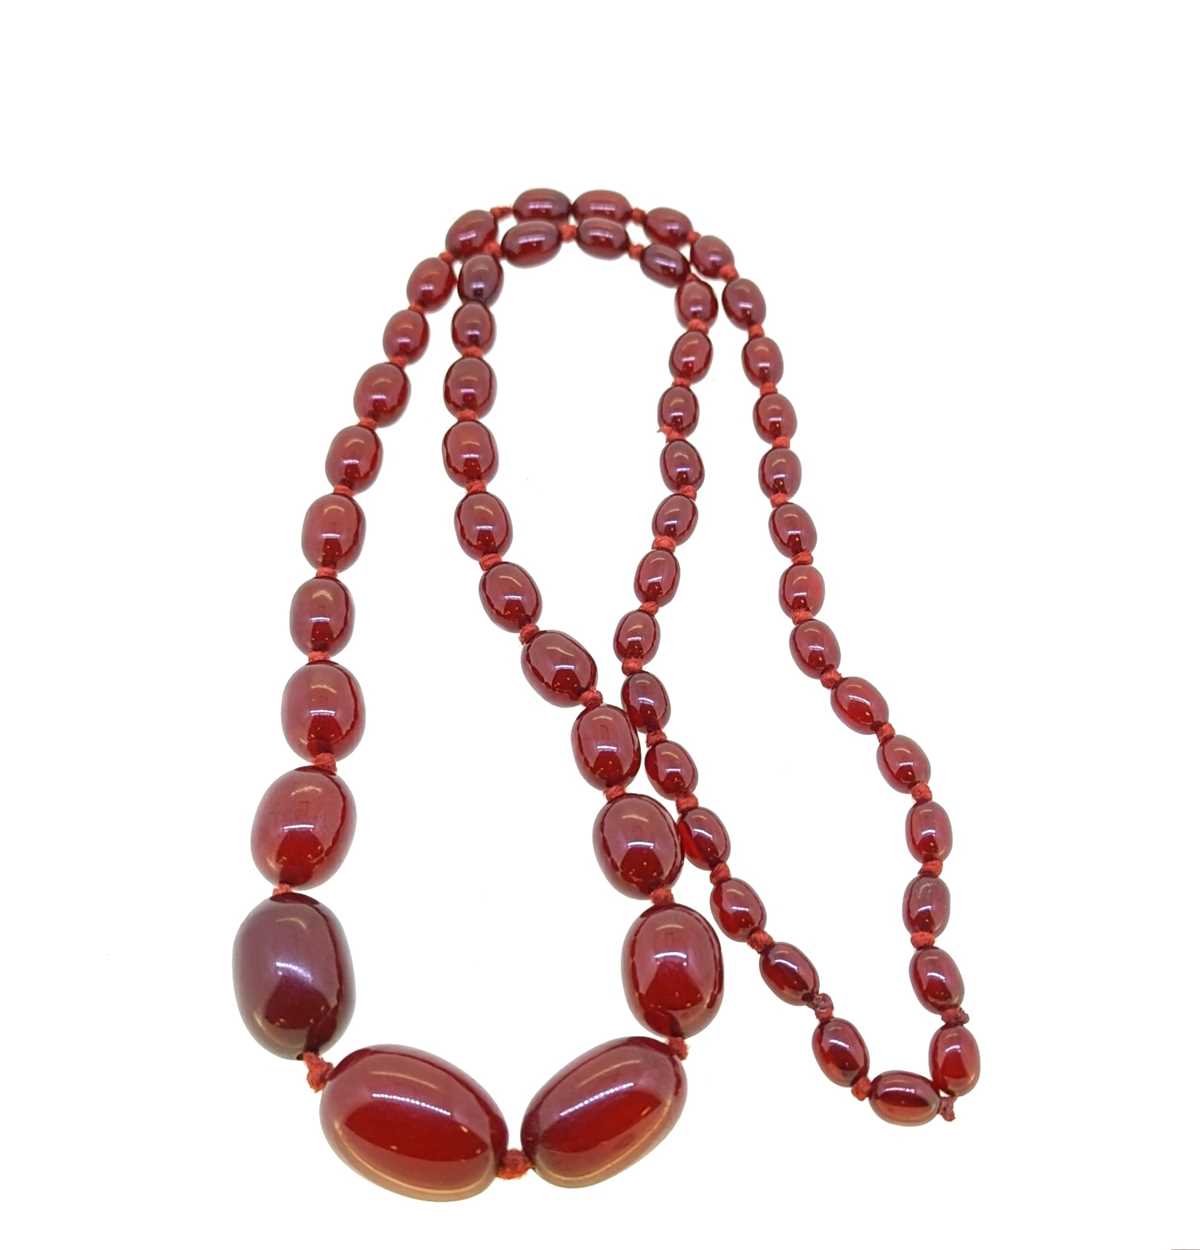 A bakelite bead necklace, - Image 2 of 5